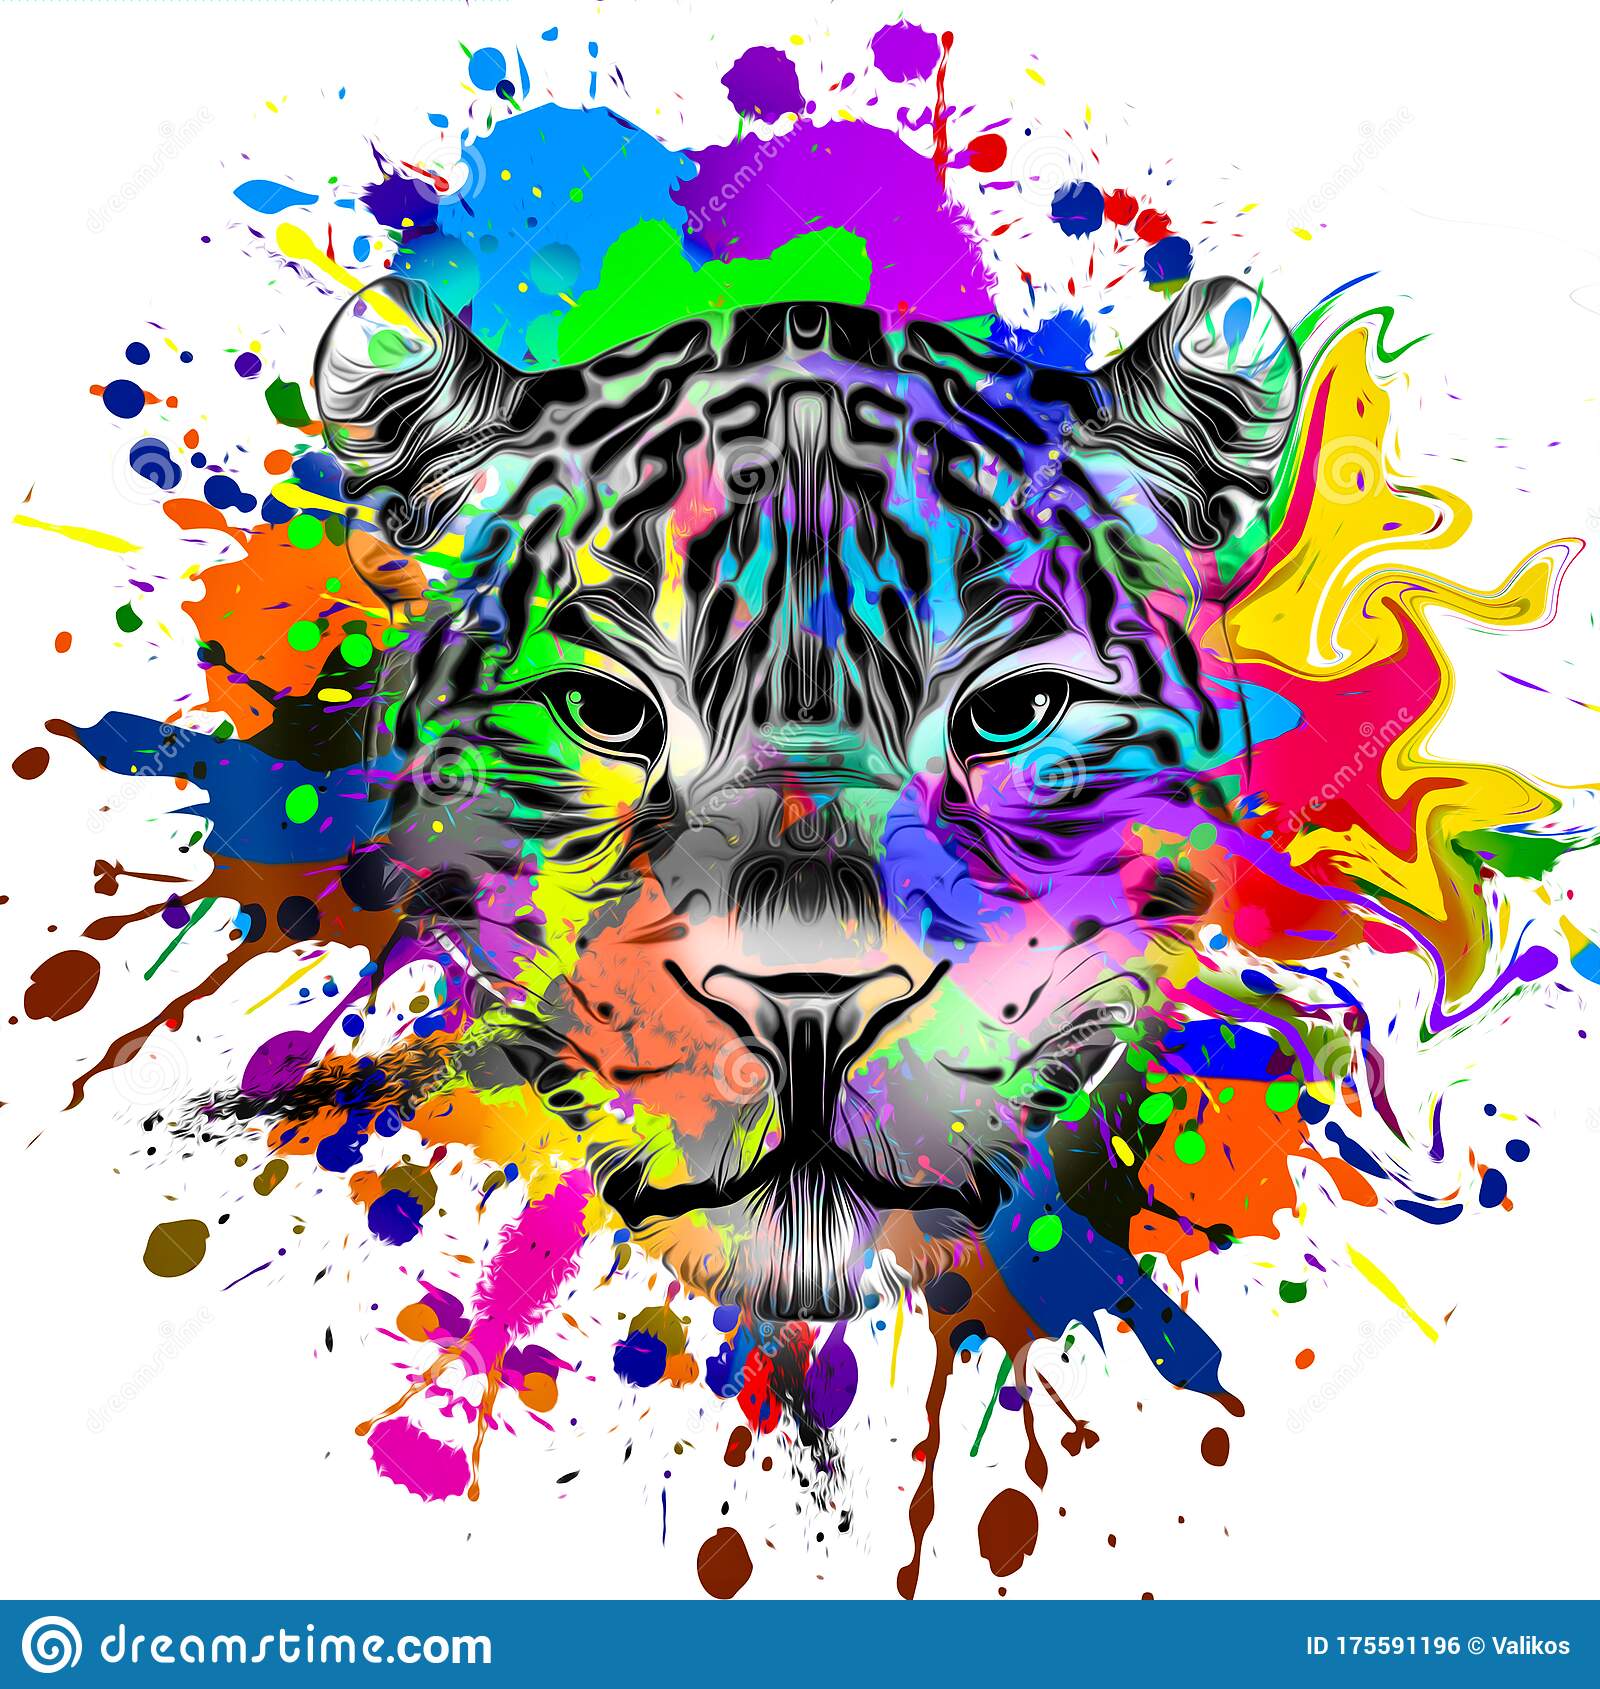 abstract-creative-illustration-colorful-tiger-black-color-abstract-creative-illustration-colorful-tiger-175591196